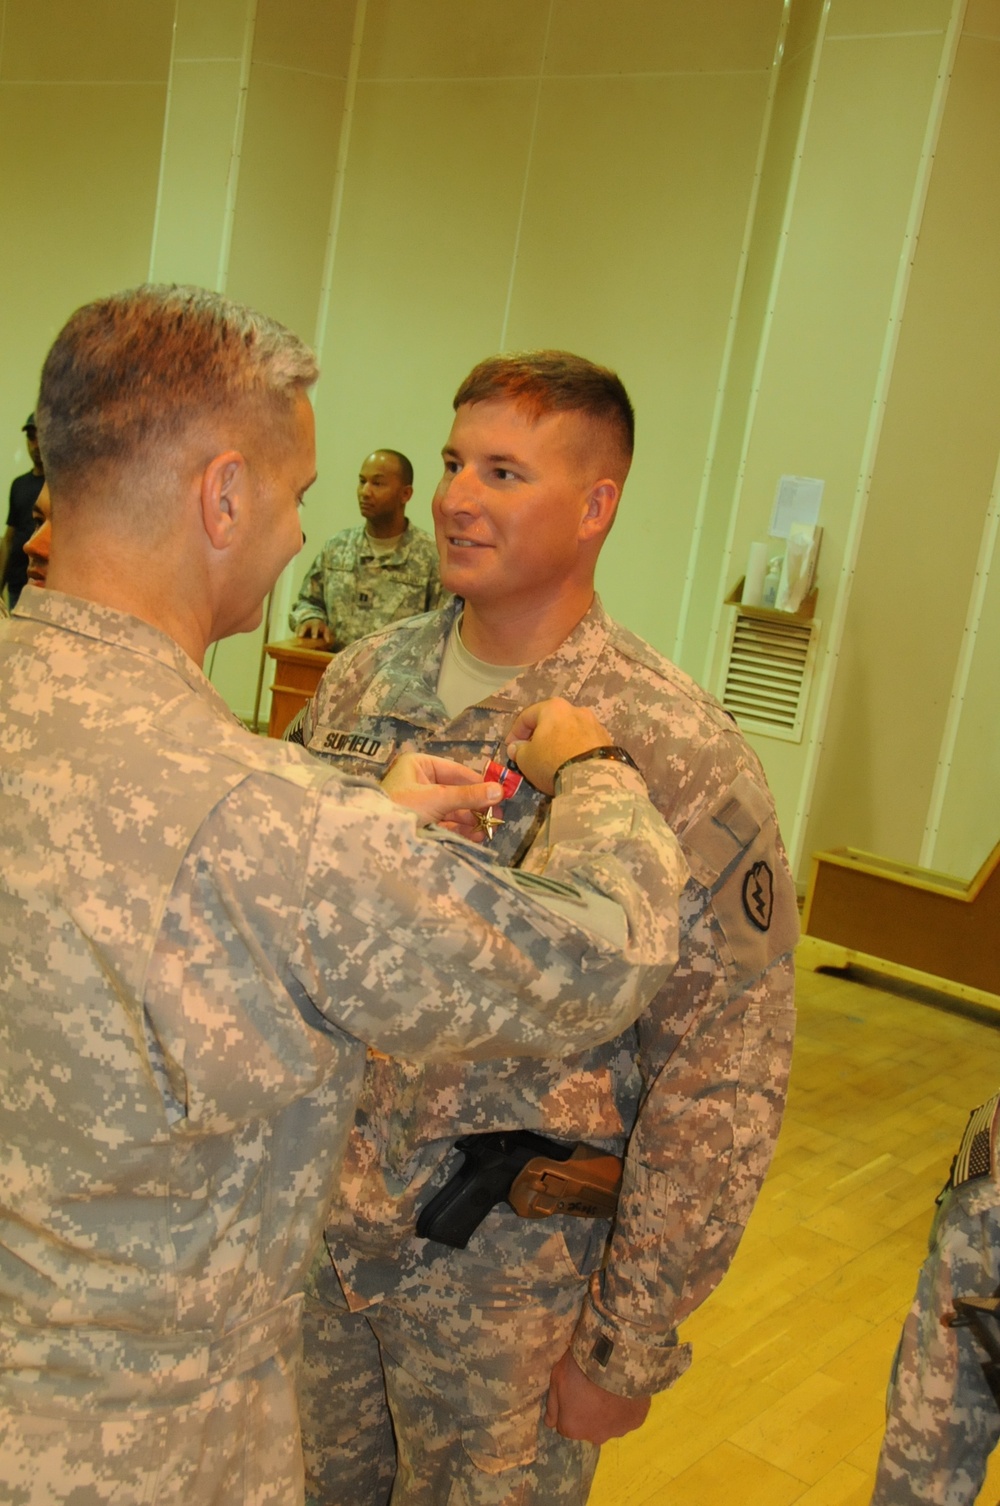 Hawaii based soldiers receive awards from USD-N commander